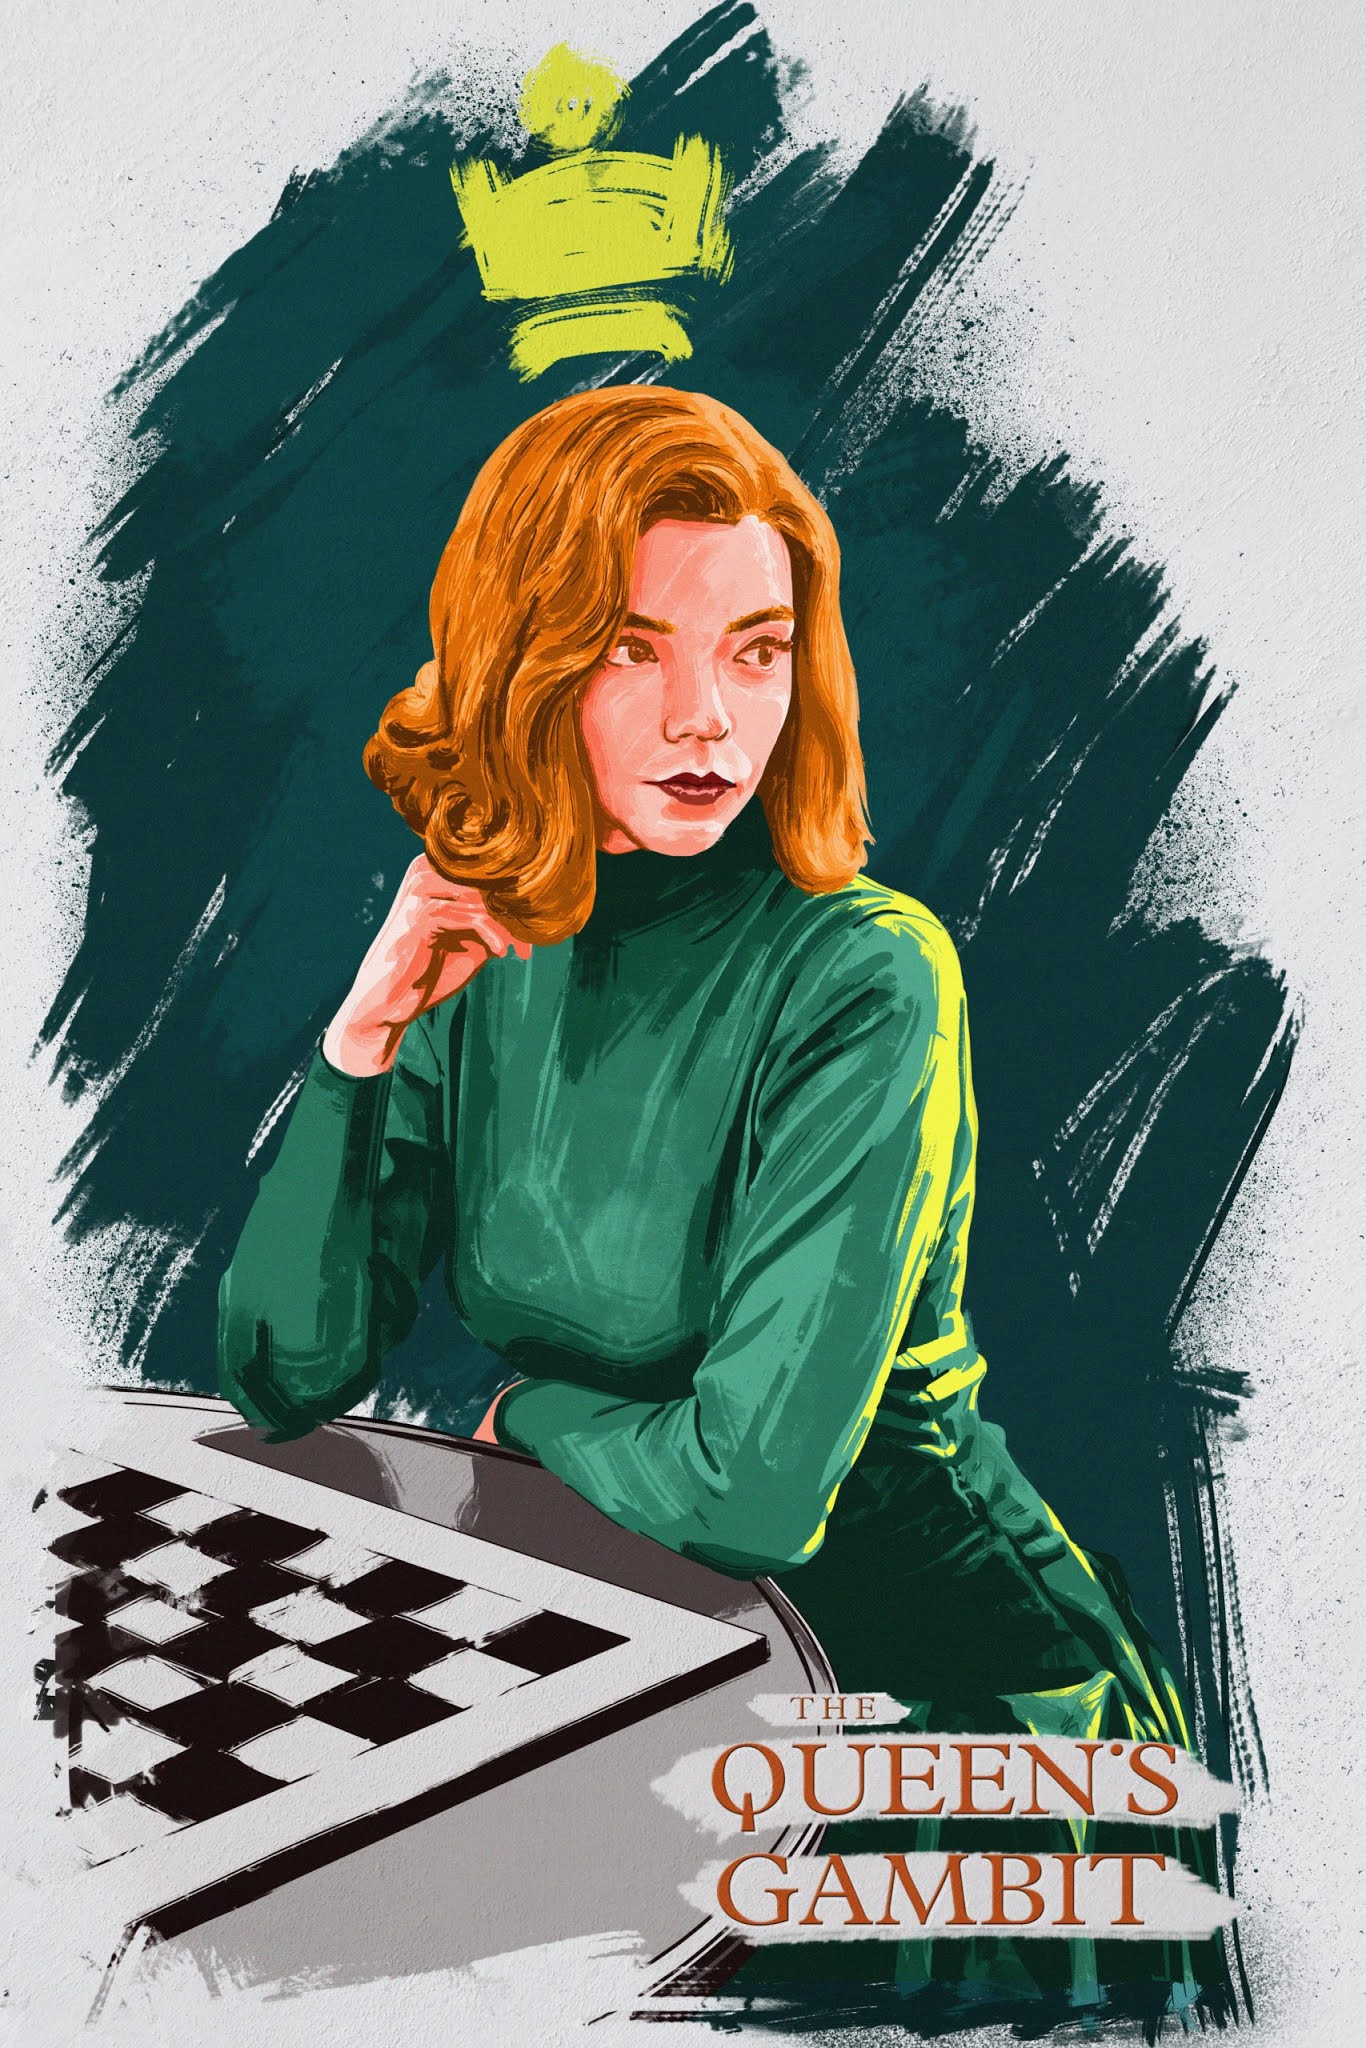 Beth Harmon  The Queen's Gambit, an art canvas by Laura Rianna